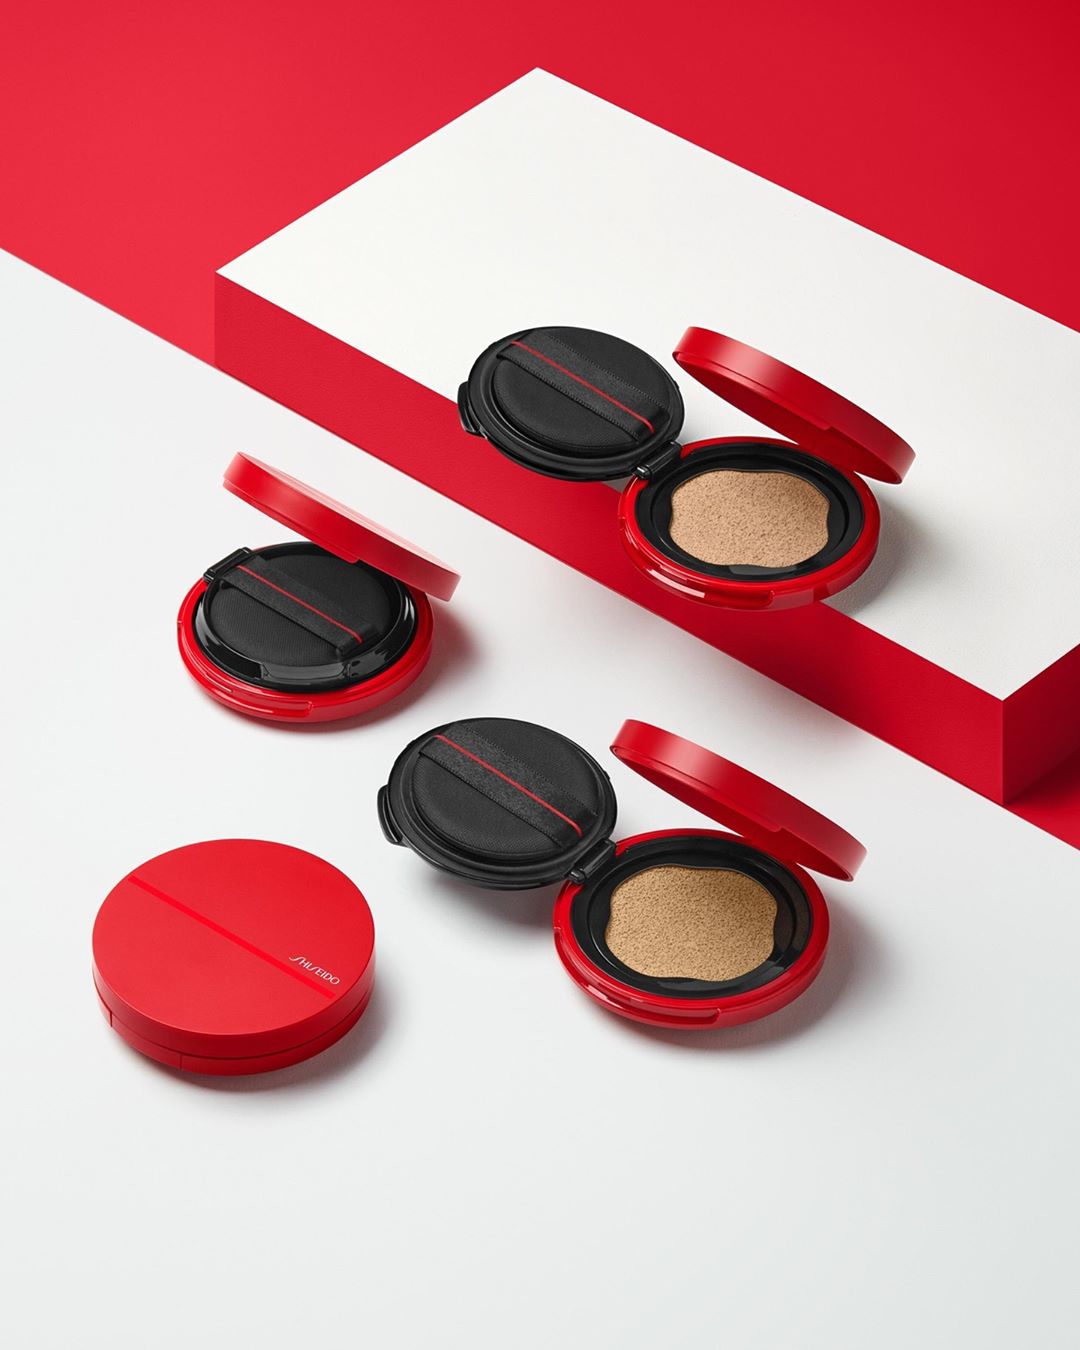 SHISEIDO - Get the glow down on our Synchro Skin Glow Cushion Compact. This high-tech formula is infused with SPF 23, antioxidant wild thyme extract, and skin-smoothing St. John’s Wort to prevent dama...